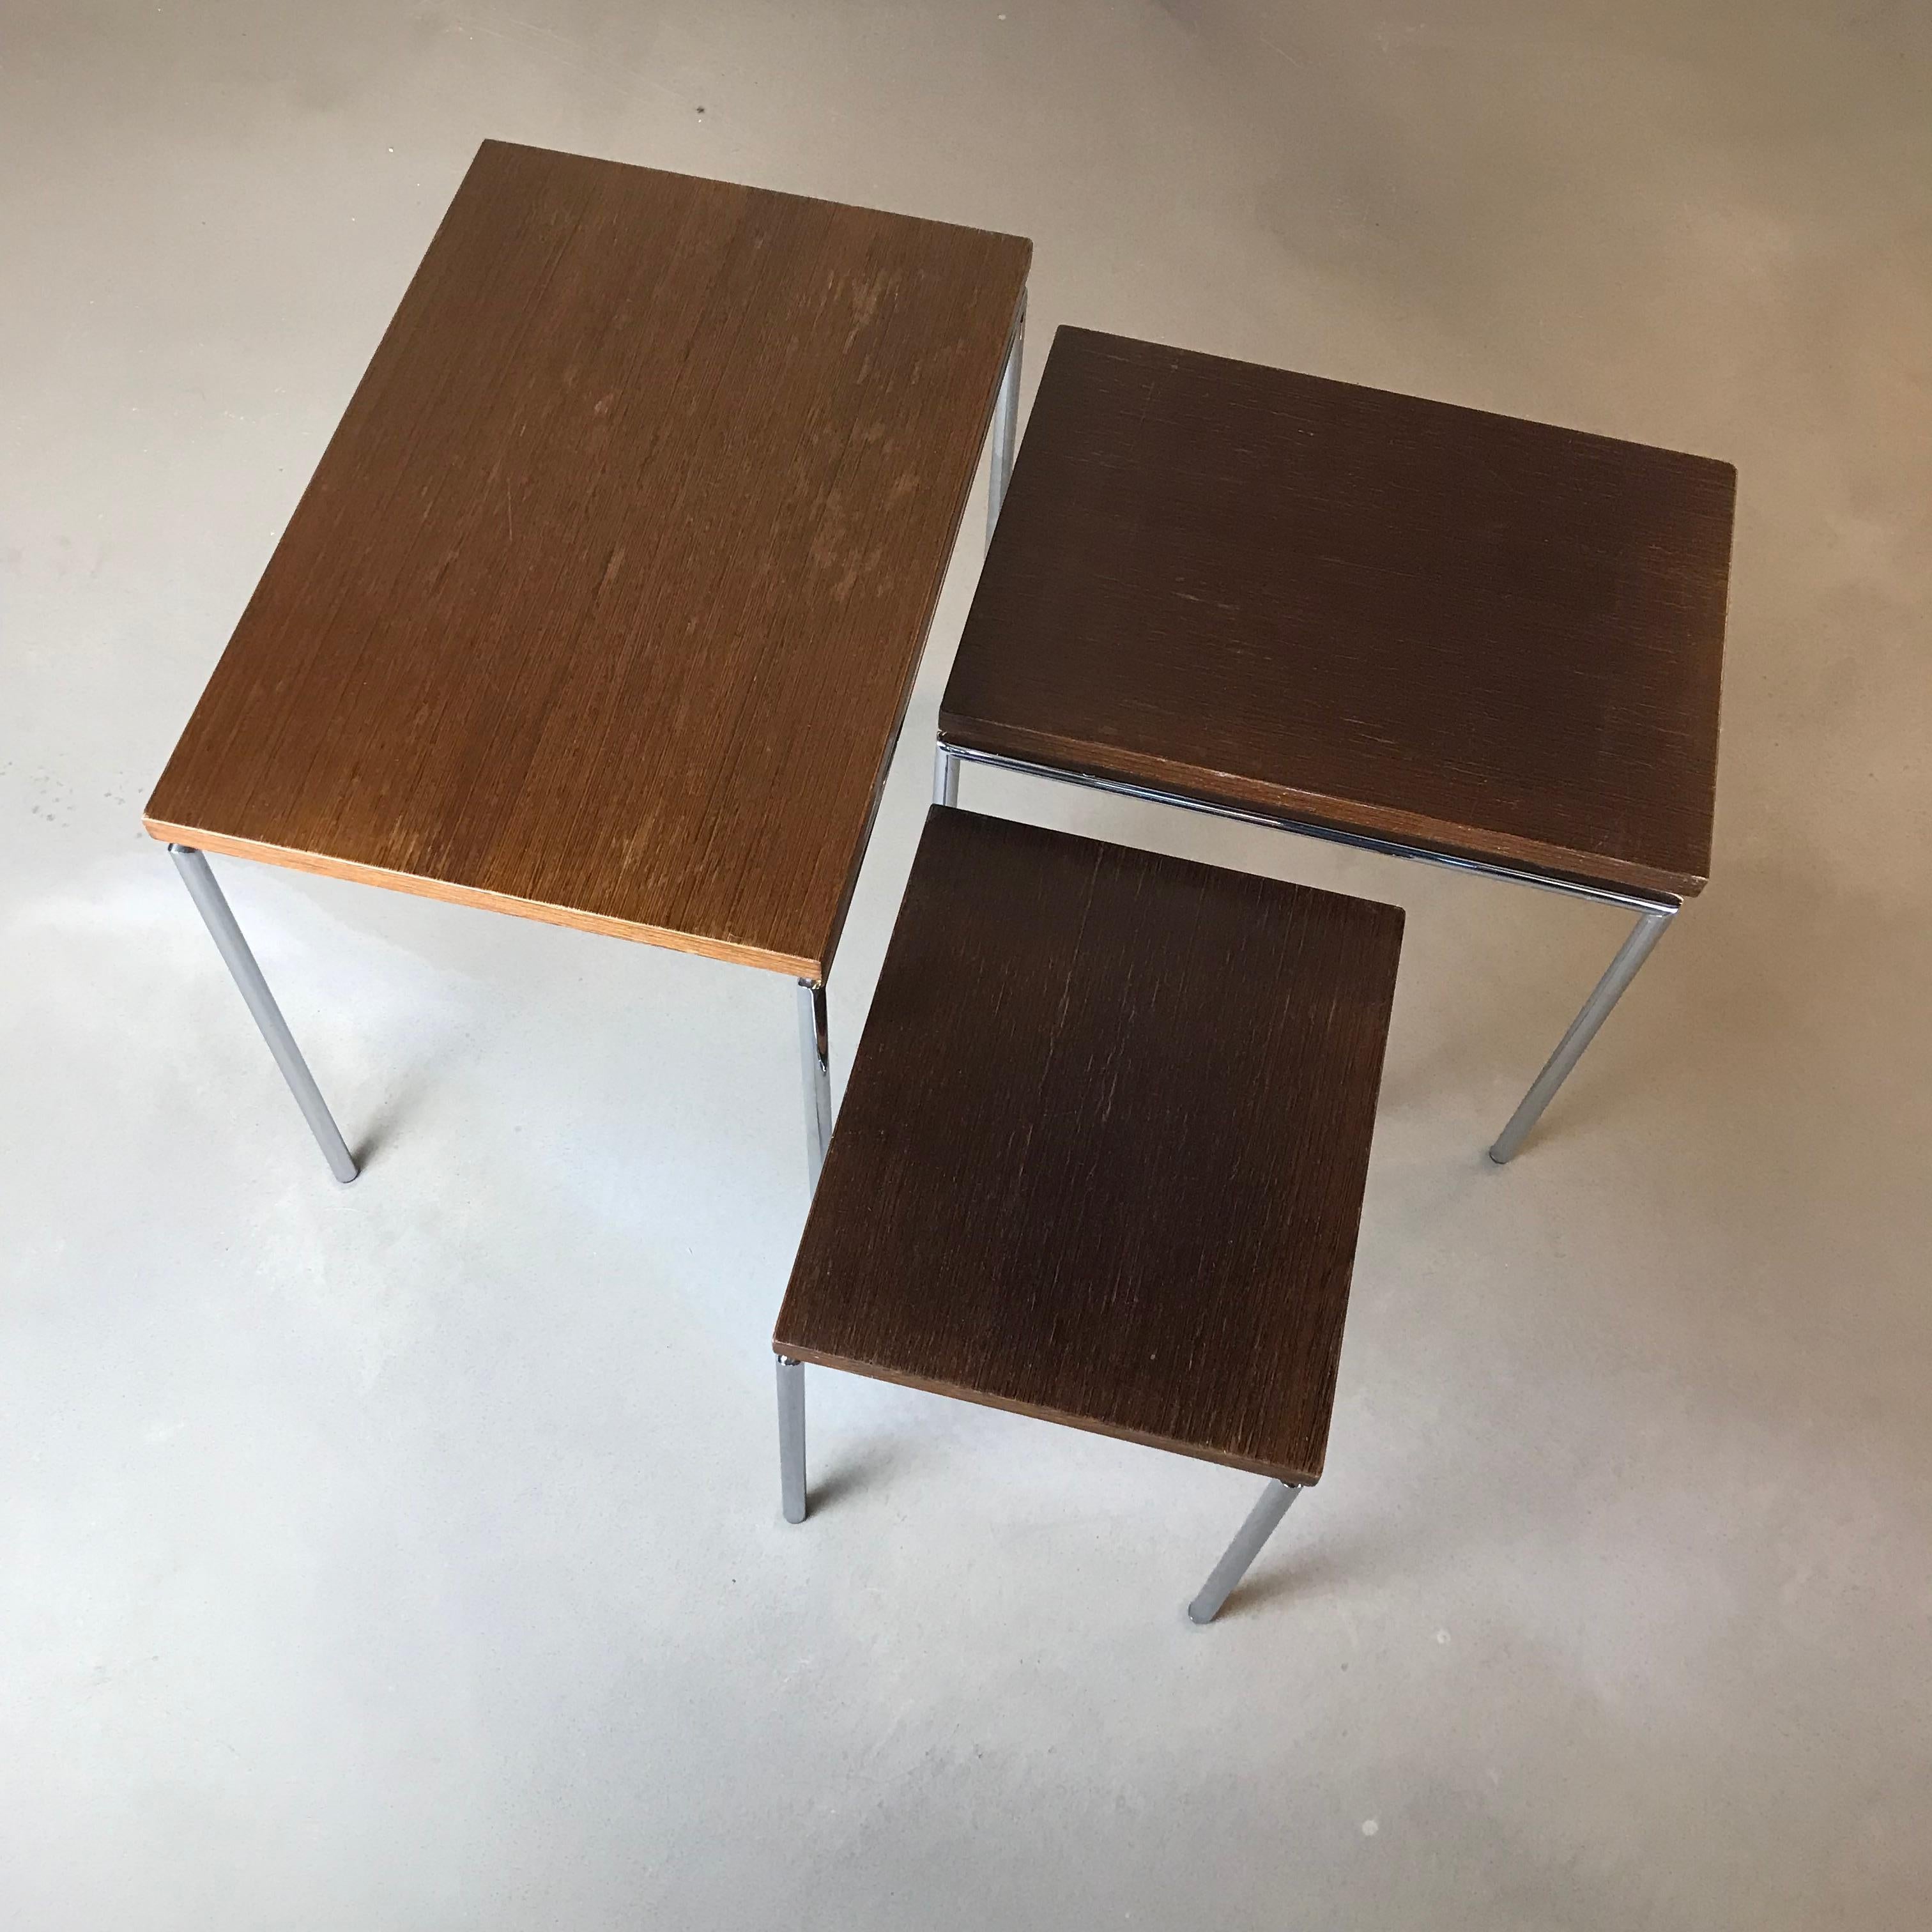 Midcentury Teak Nesting Tables by Cees Braakman for Pastoe, 1950s For Sale 2